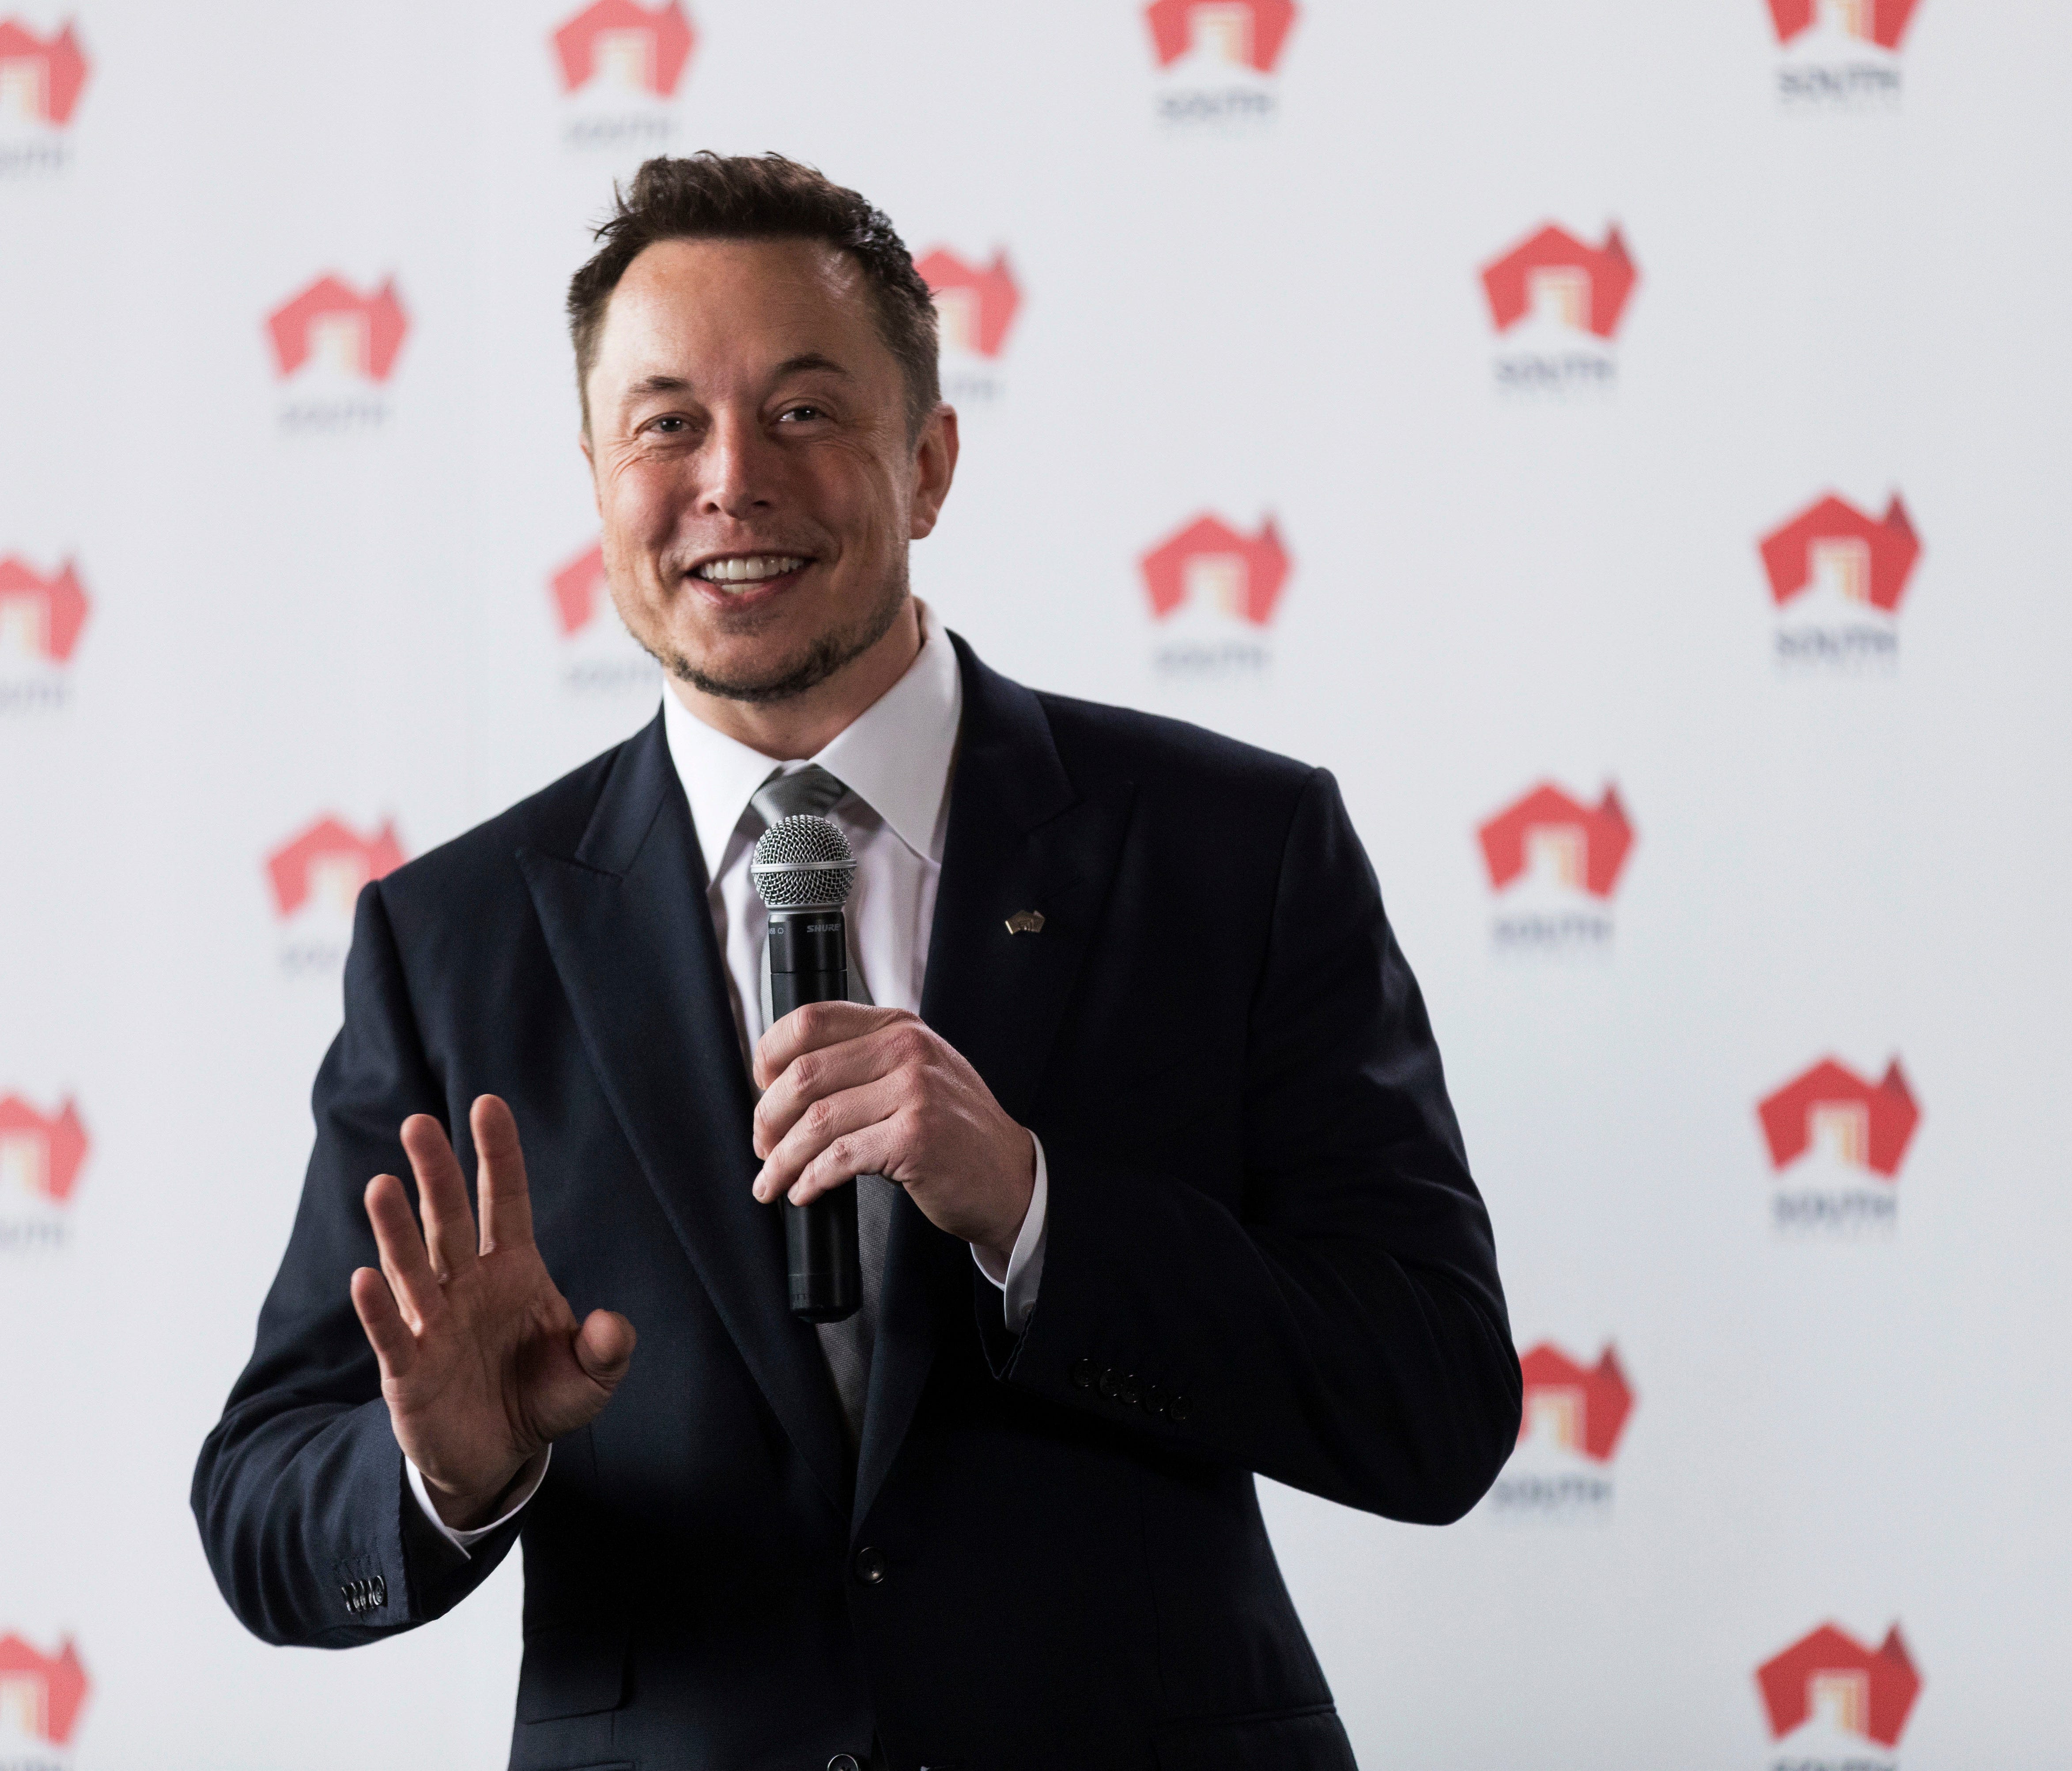 Tesla CEO Elon Musk talks about the development of the worlds biggest lithium-ion battery in Adelaide, Australia, Friday, July 7, 2017. Tesla will partner with French renewable energy company Neoen to build the 100-megawatt battery farm in South Aust